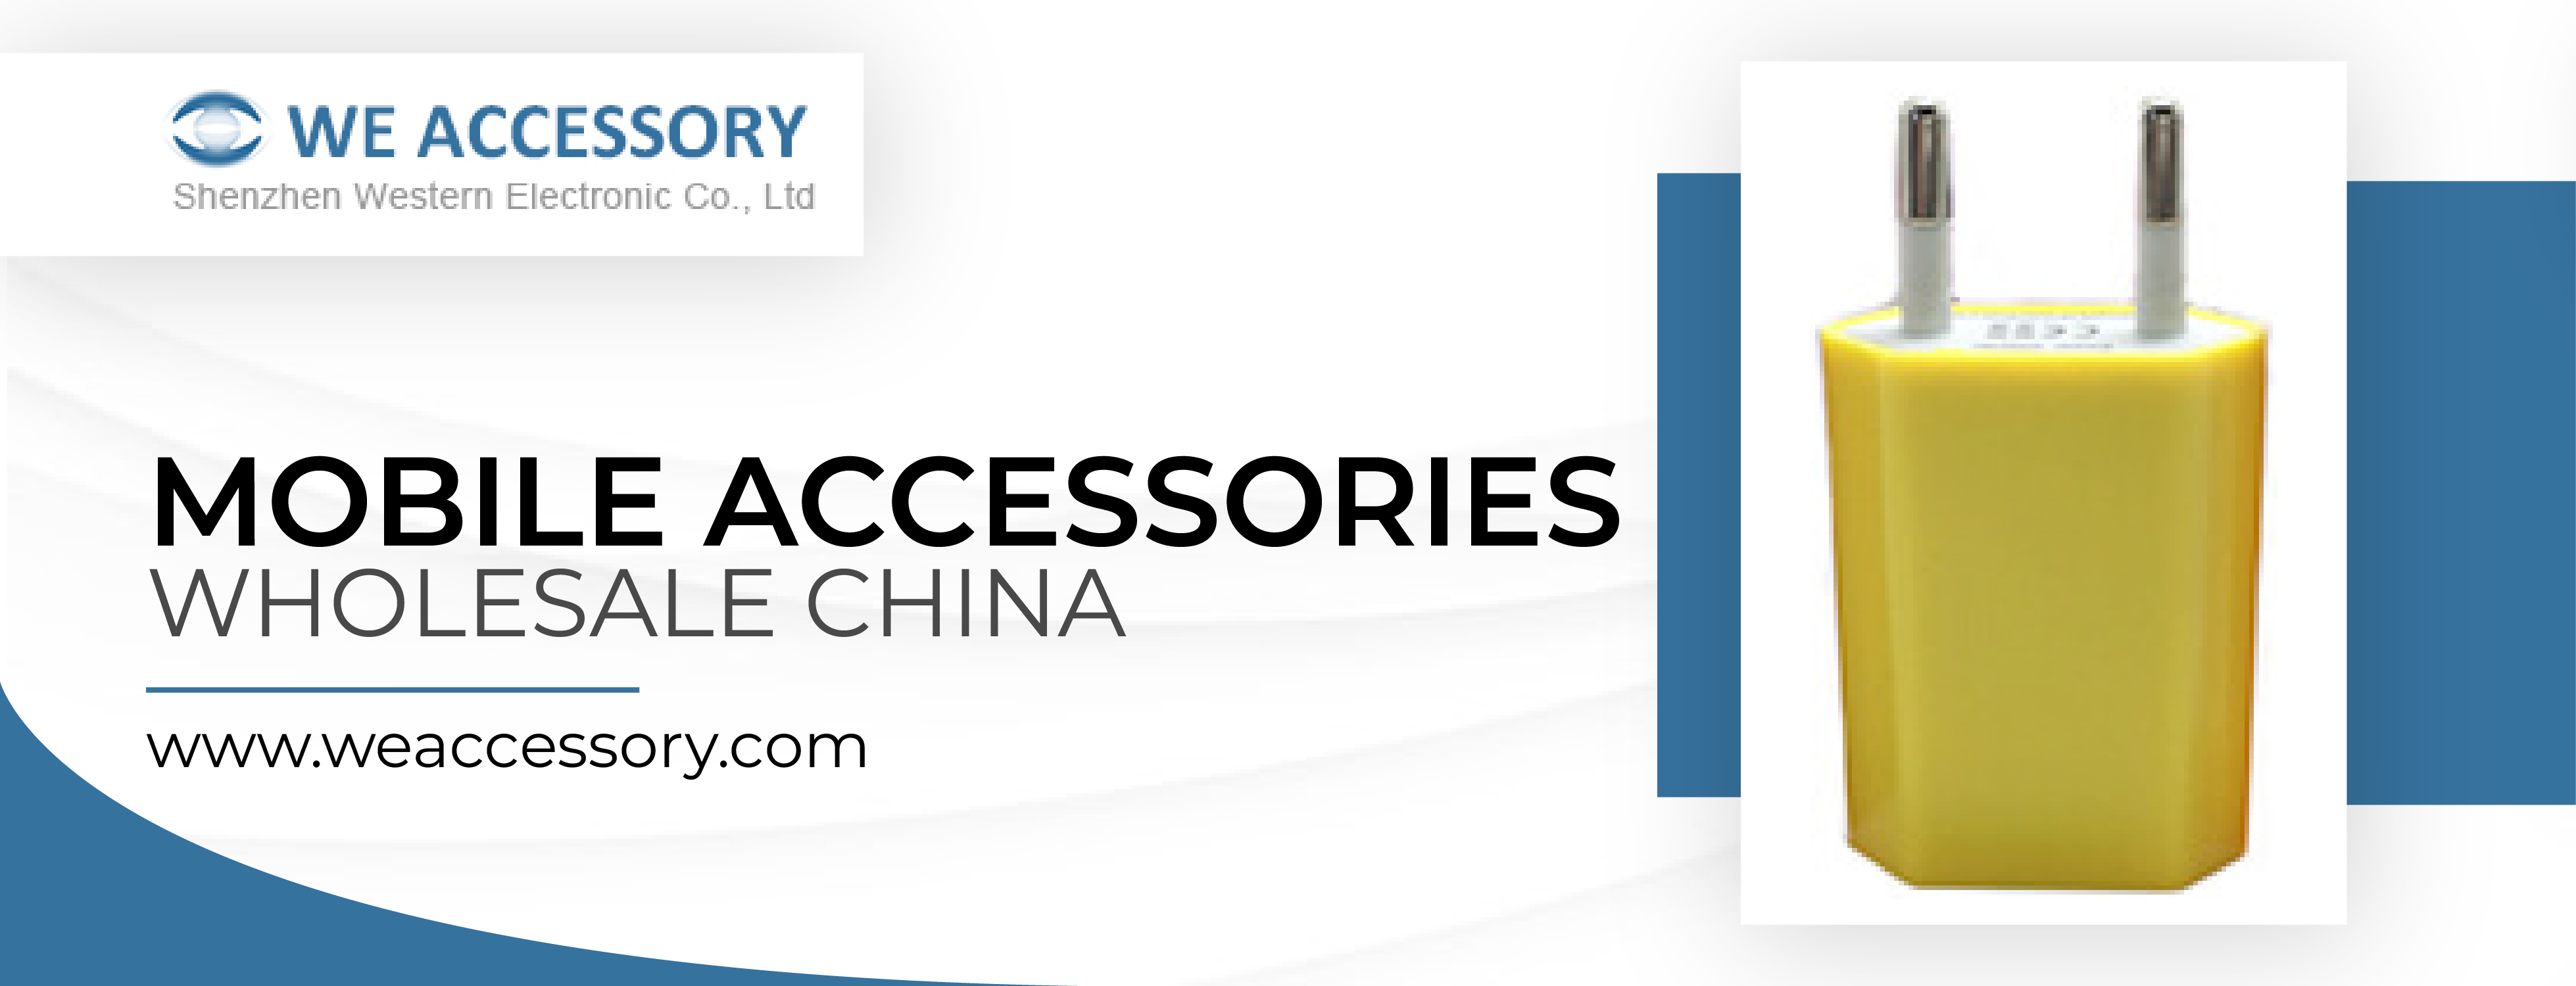 mobile accessories wholesale China 